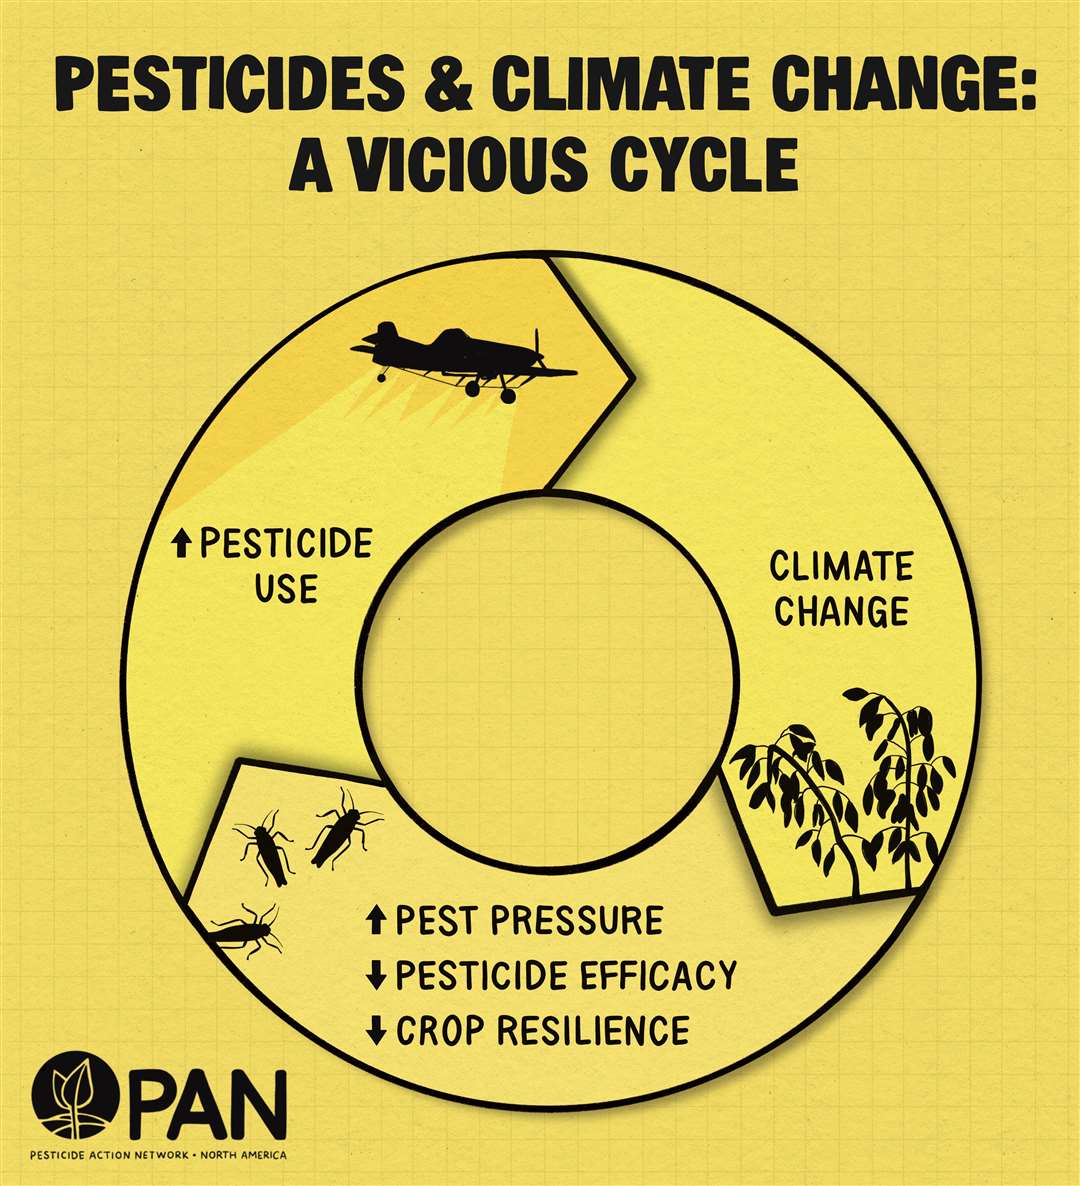 Using pesticides contributes to climate change which brings more pests which encourages more use of chemical deterrents, campaigners said (Pan UK/PA)